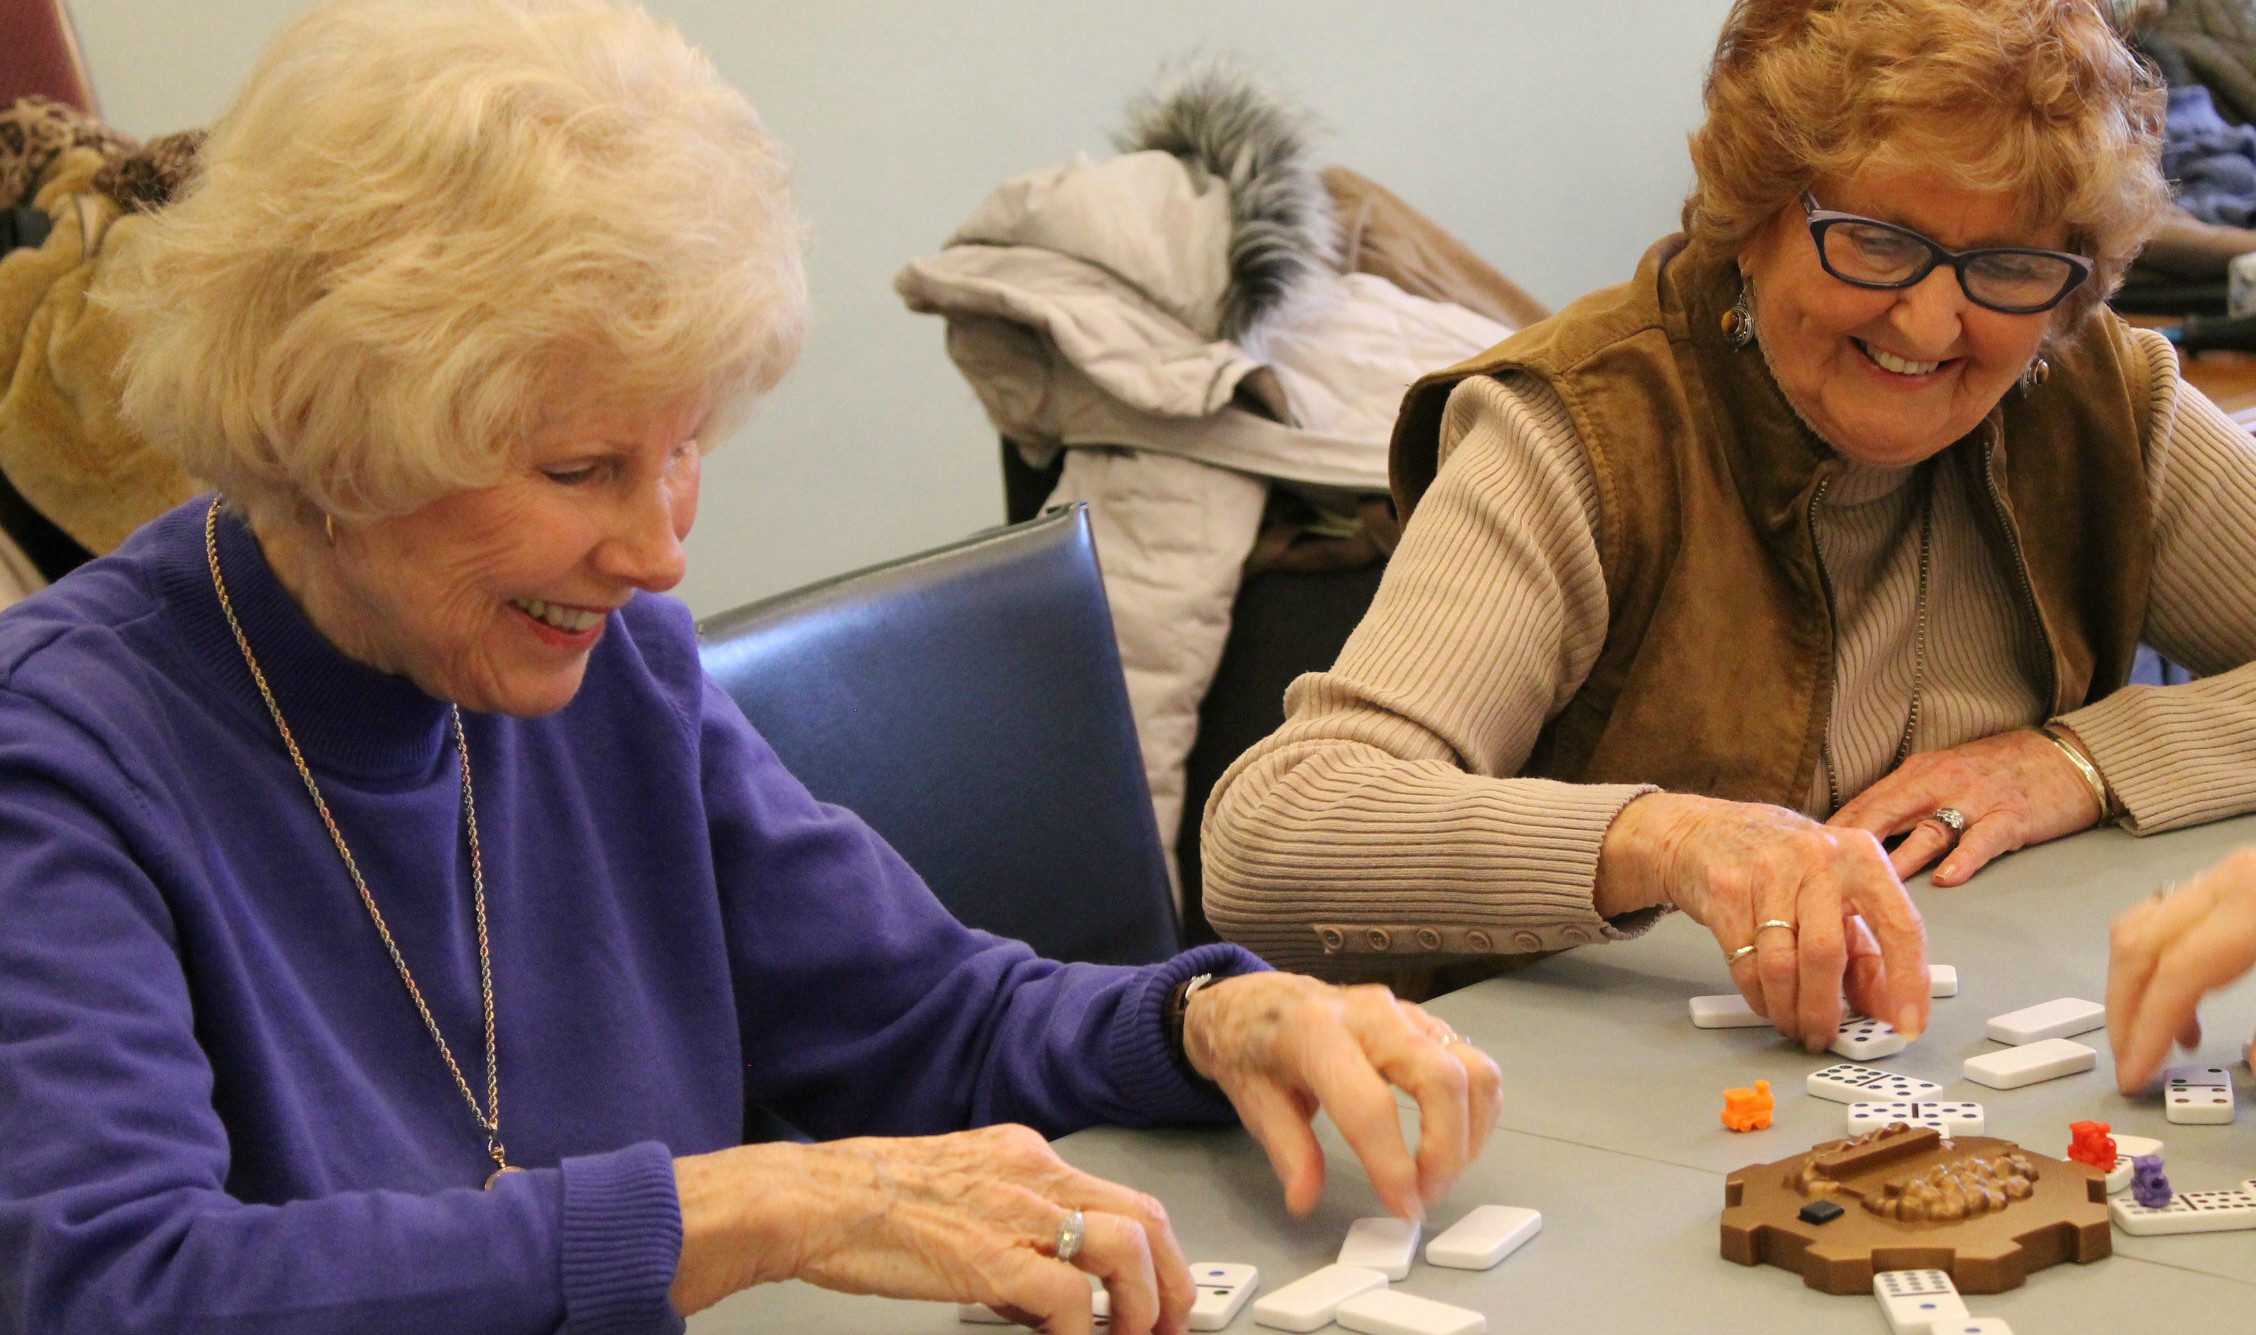 Rachel Weldrick and Stephanie Hatzifililathis (neither shown) spent a day playing — well, losing at — dominoes as they took pictures and talked to these women for the story-telling project, Seniors of Canada.